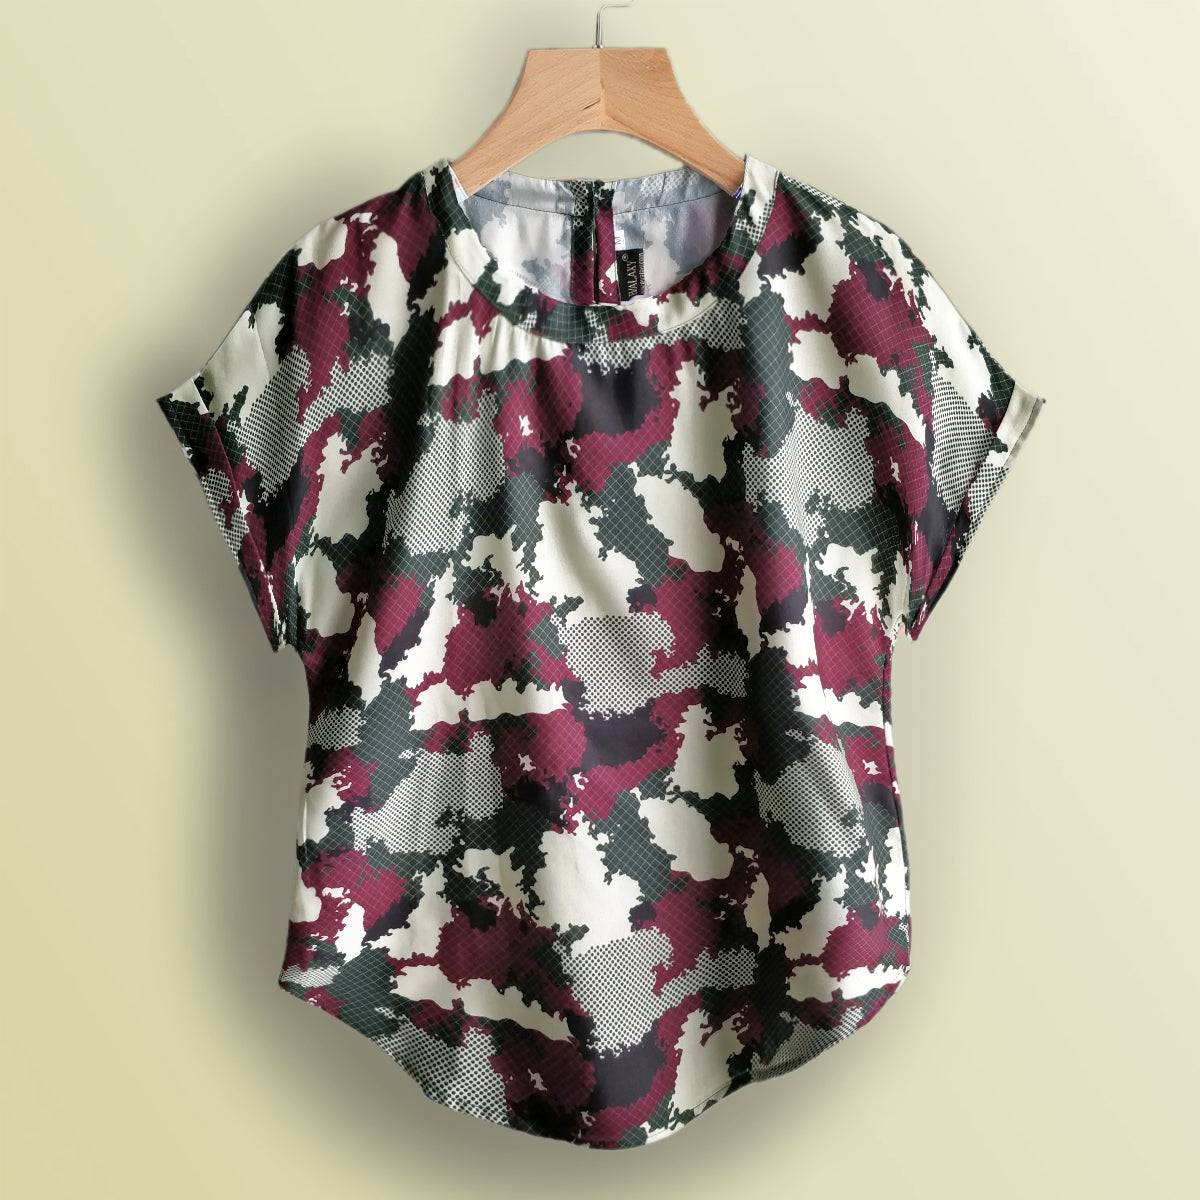 Leafy & Abstract Designs Top Combo Pack of 5 Pcs for Women & Girls